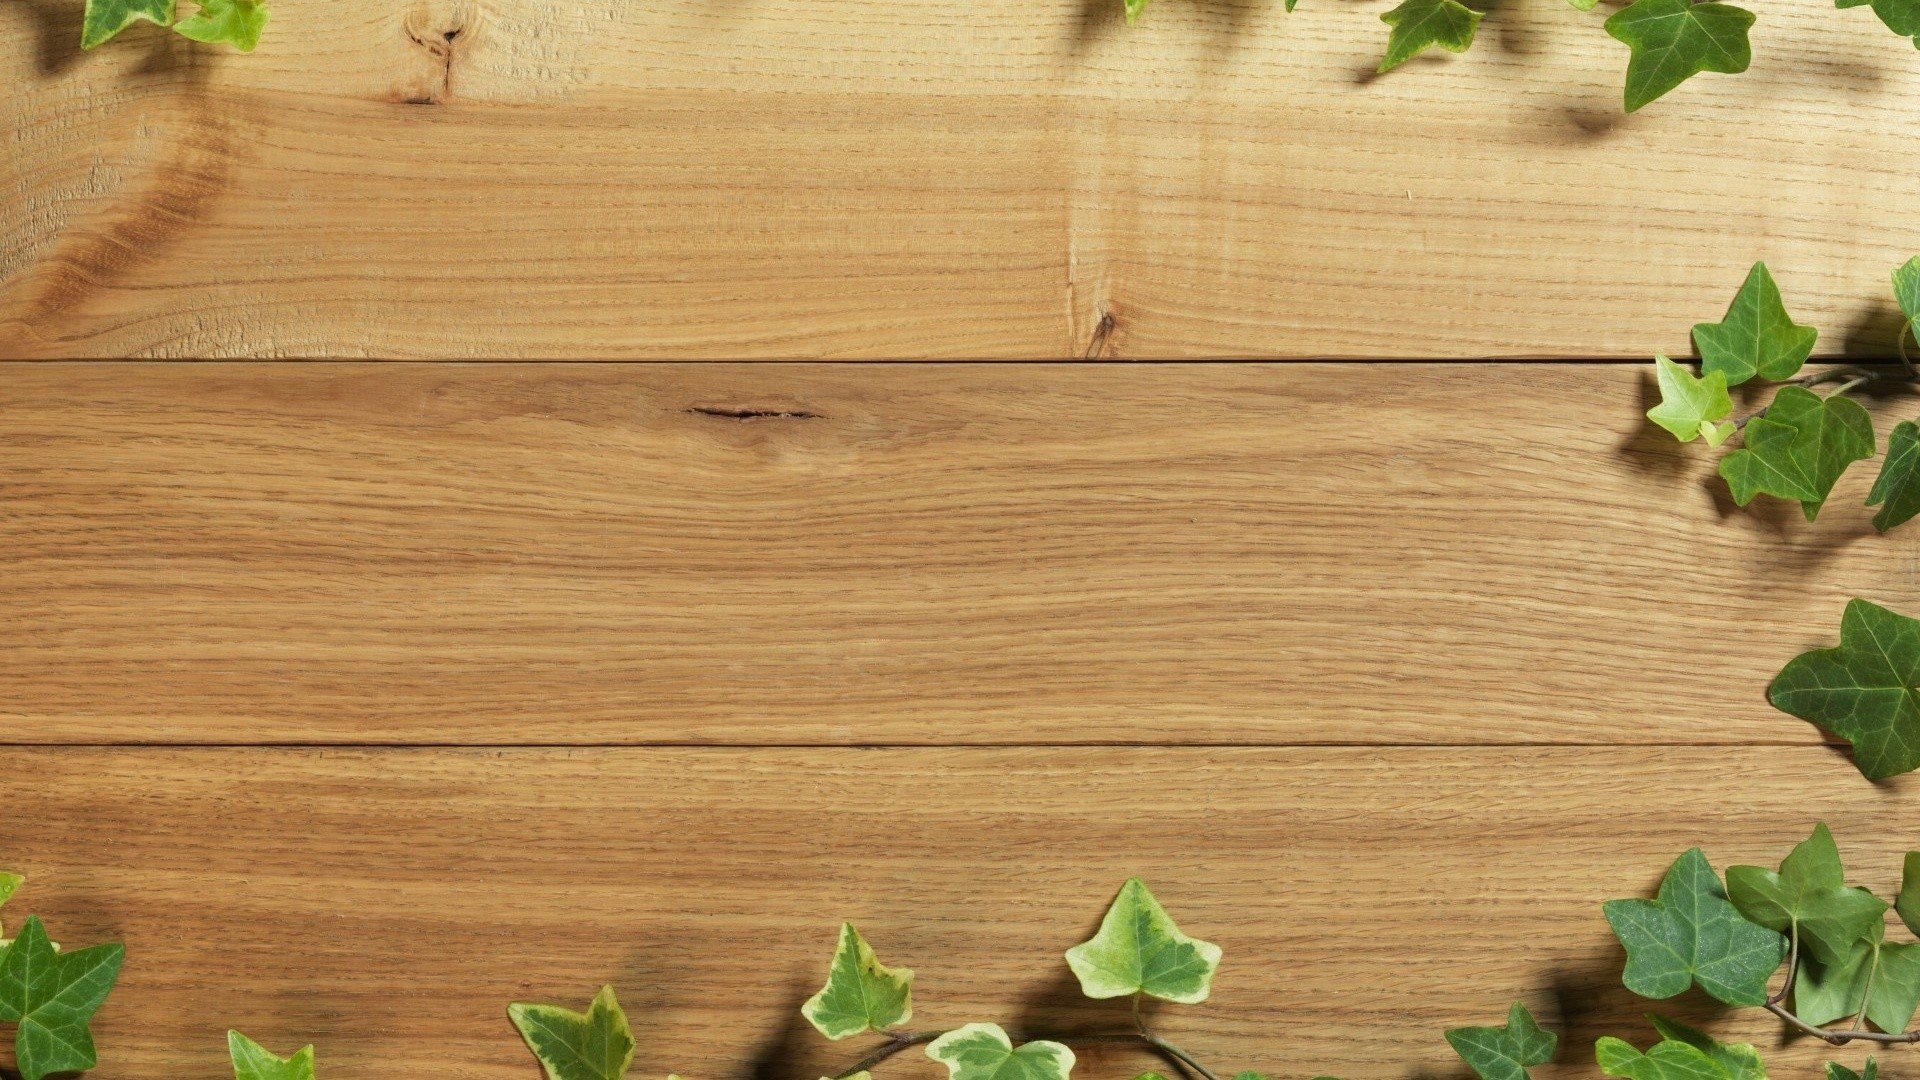 wood, Tables, Textures, Ivy, Board Wallpaper